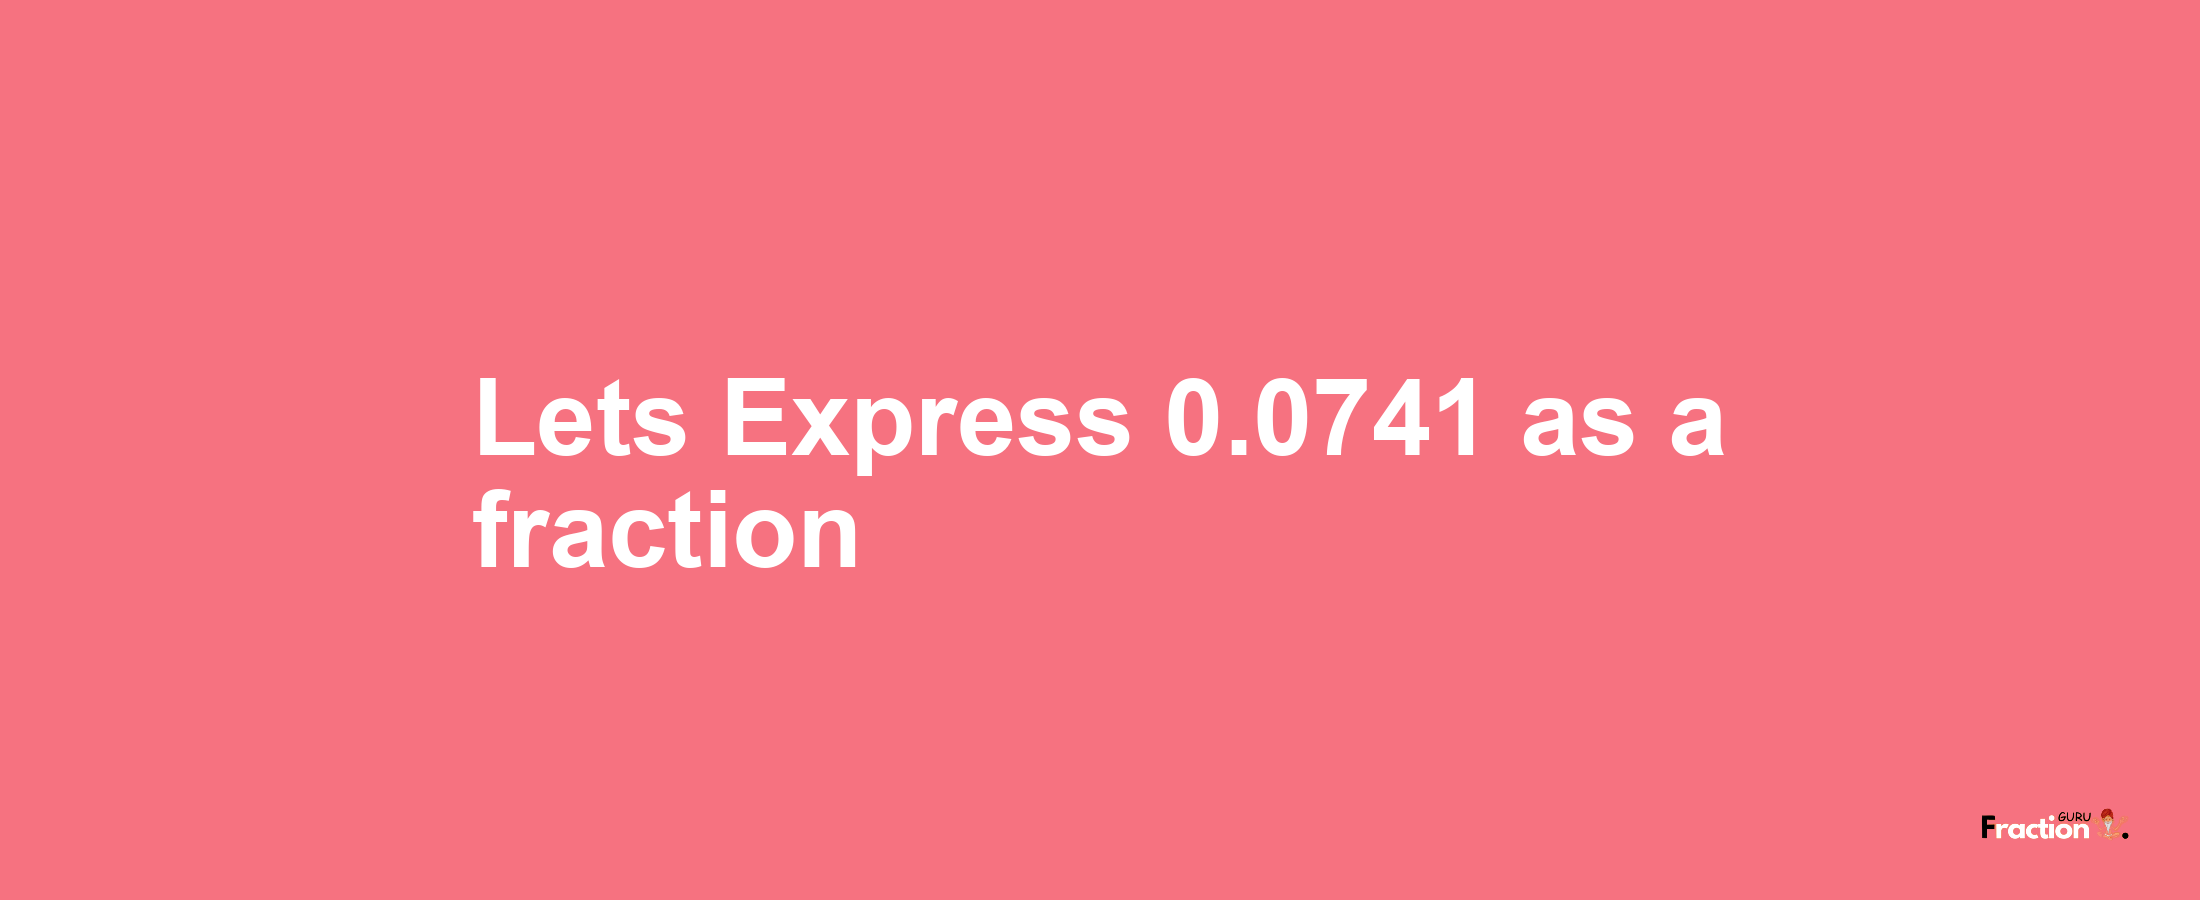 Lets Express 0.0741 as afraction